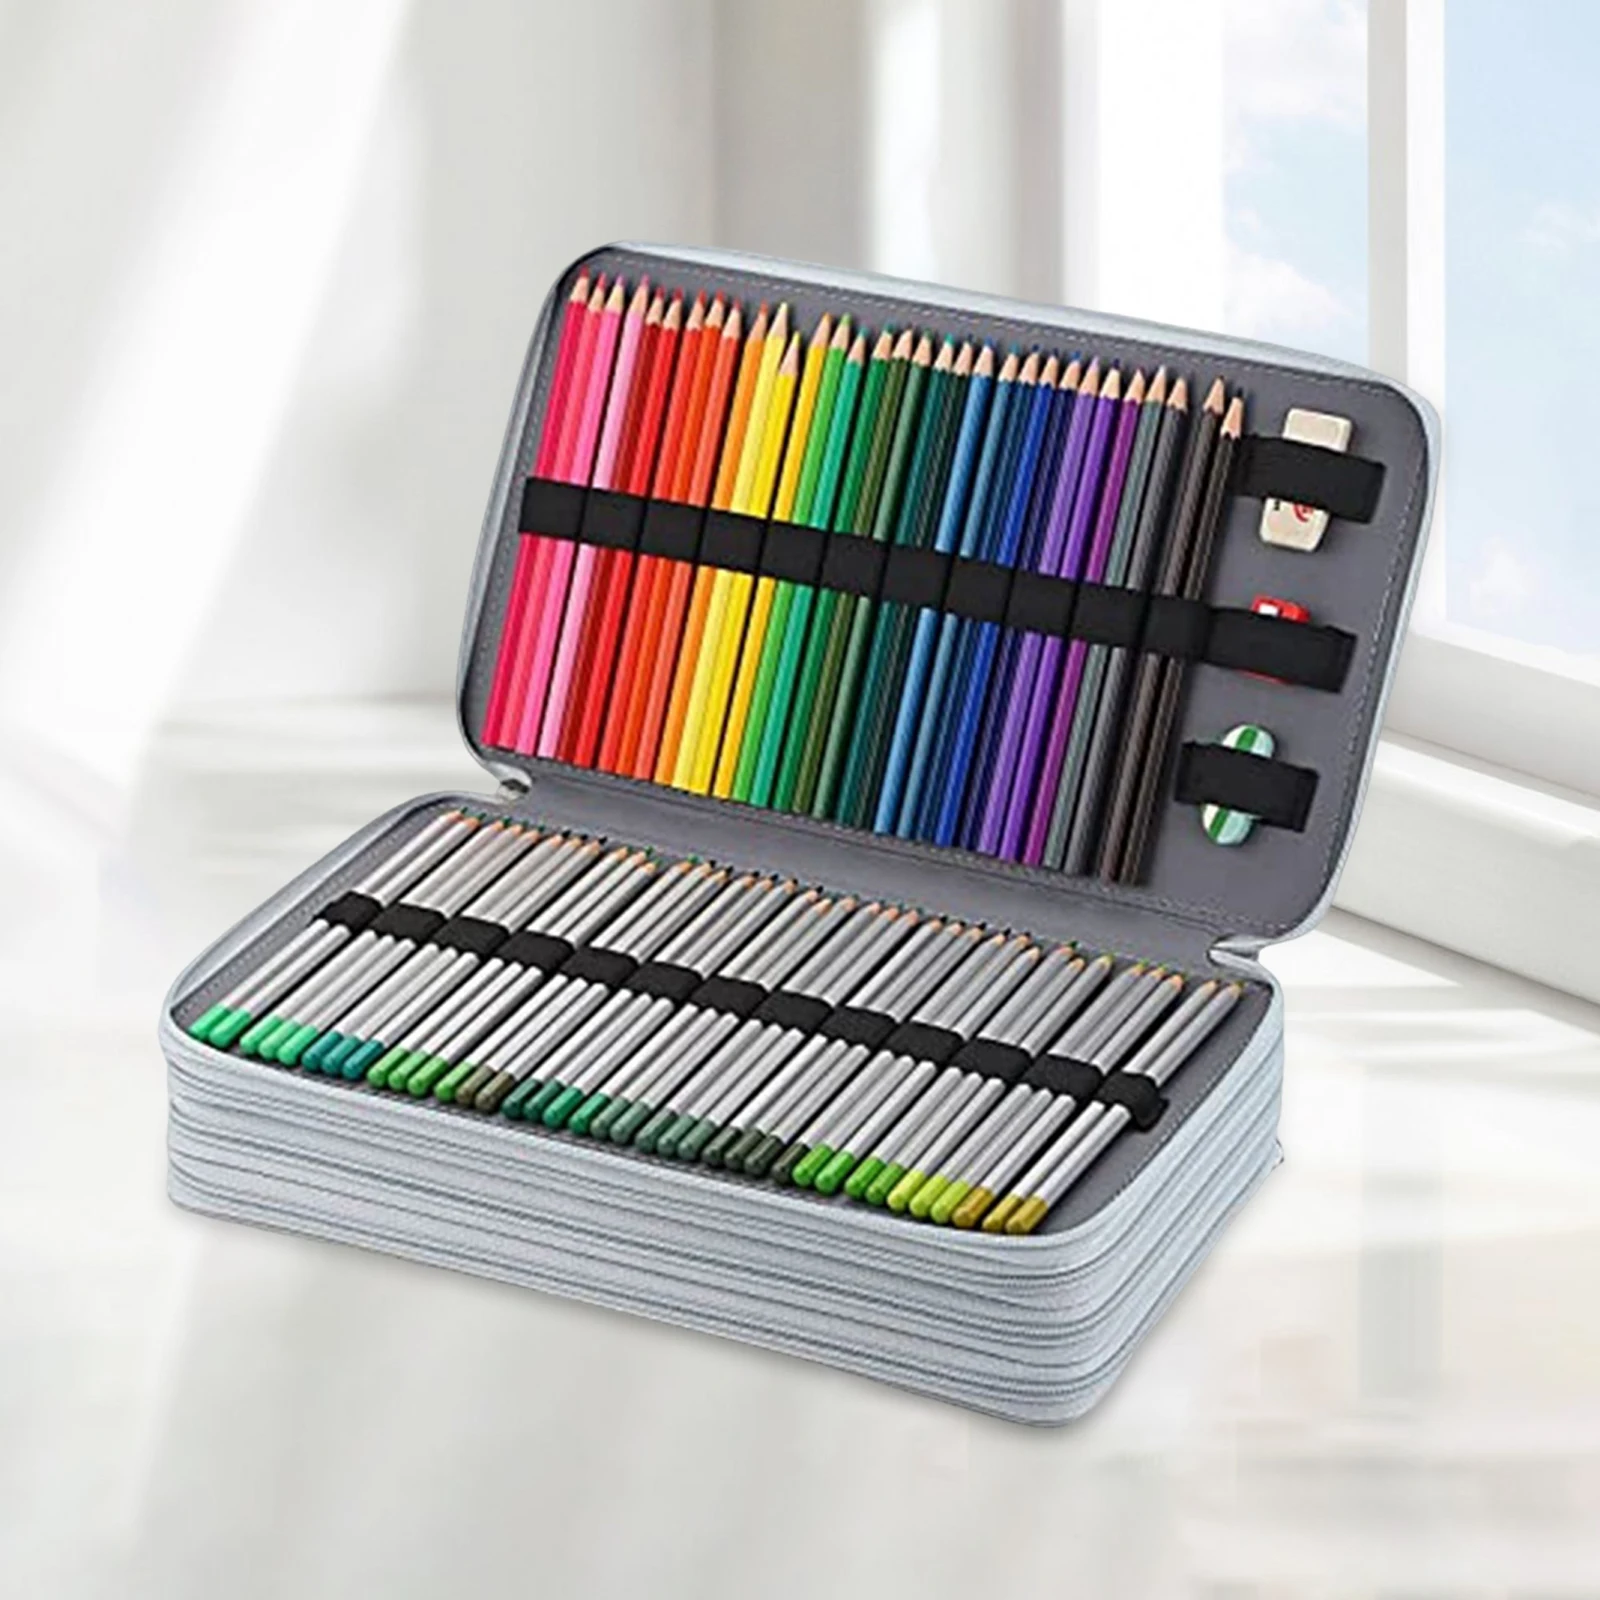 Large Capacity 300 Slots Colored Pencil Organizer Colouring Pencils Organizer Zipper 4 Layers for Makeup Brushes Stationery